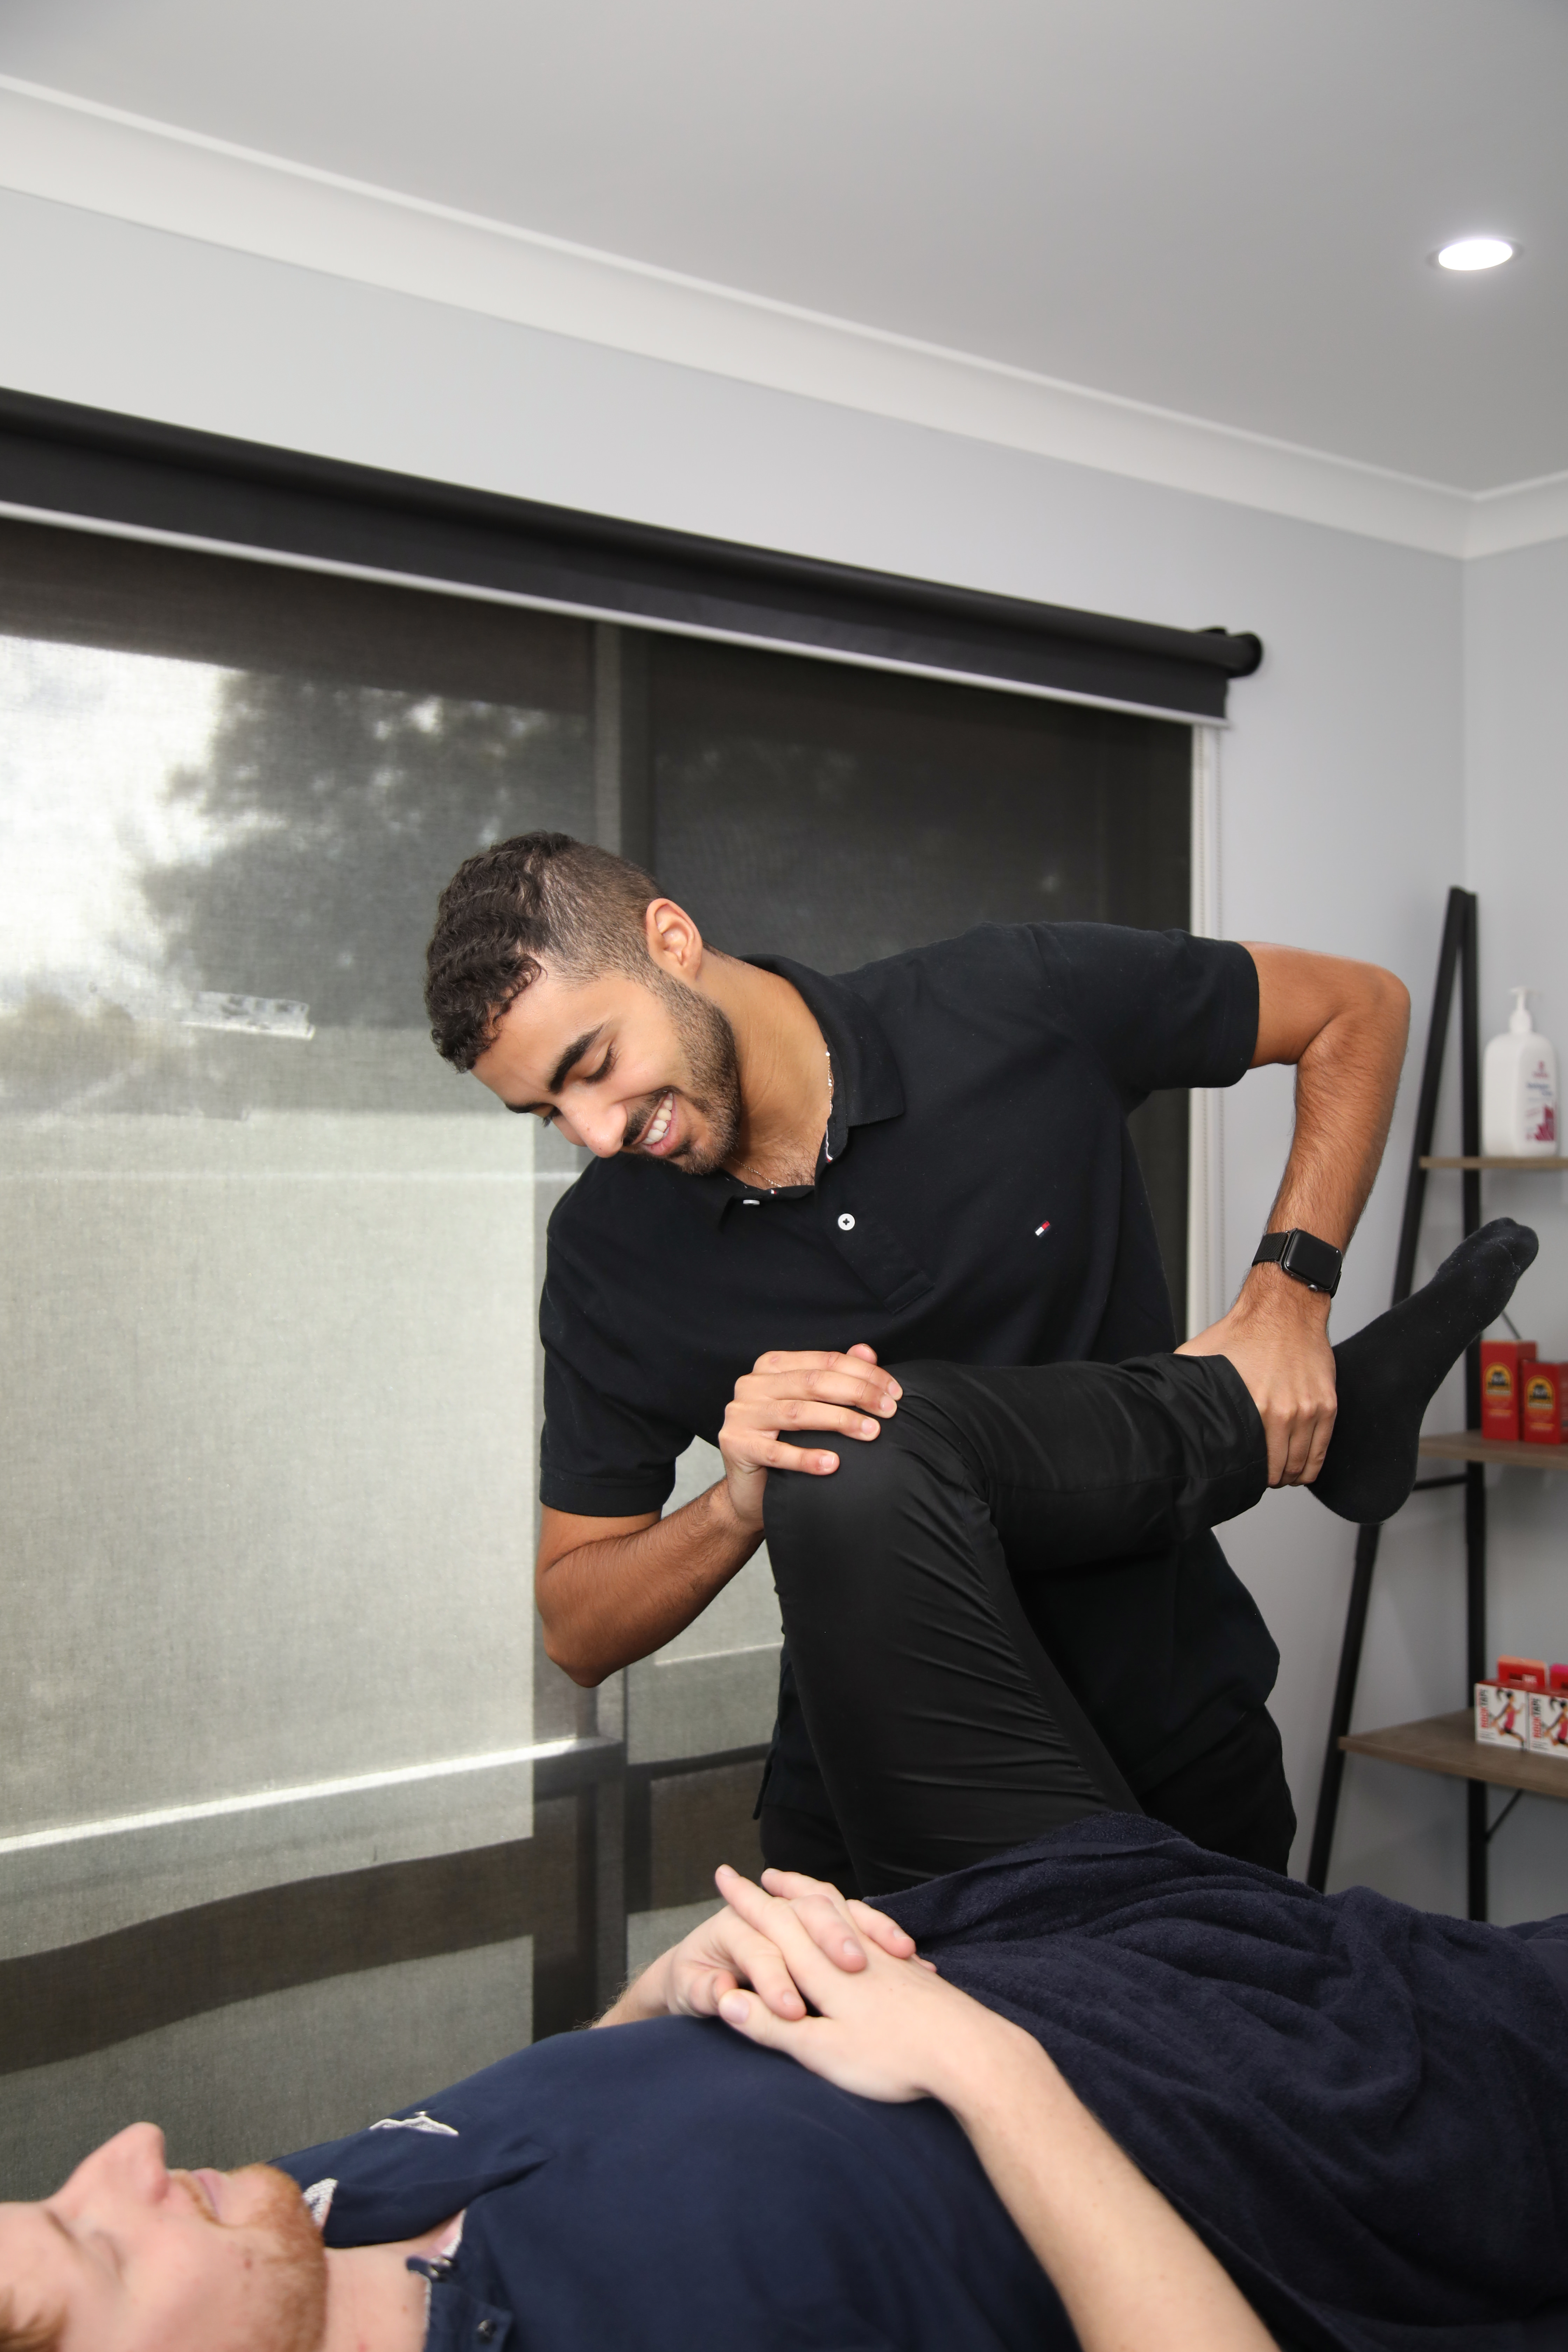 Osteopathy for Hip and Thigh Pain